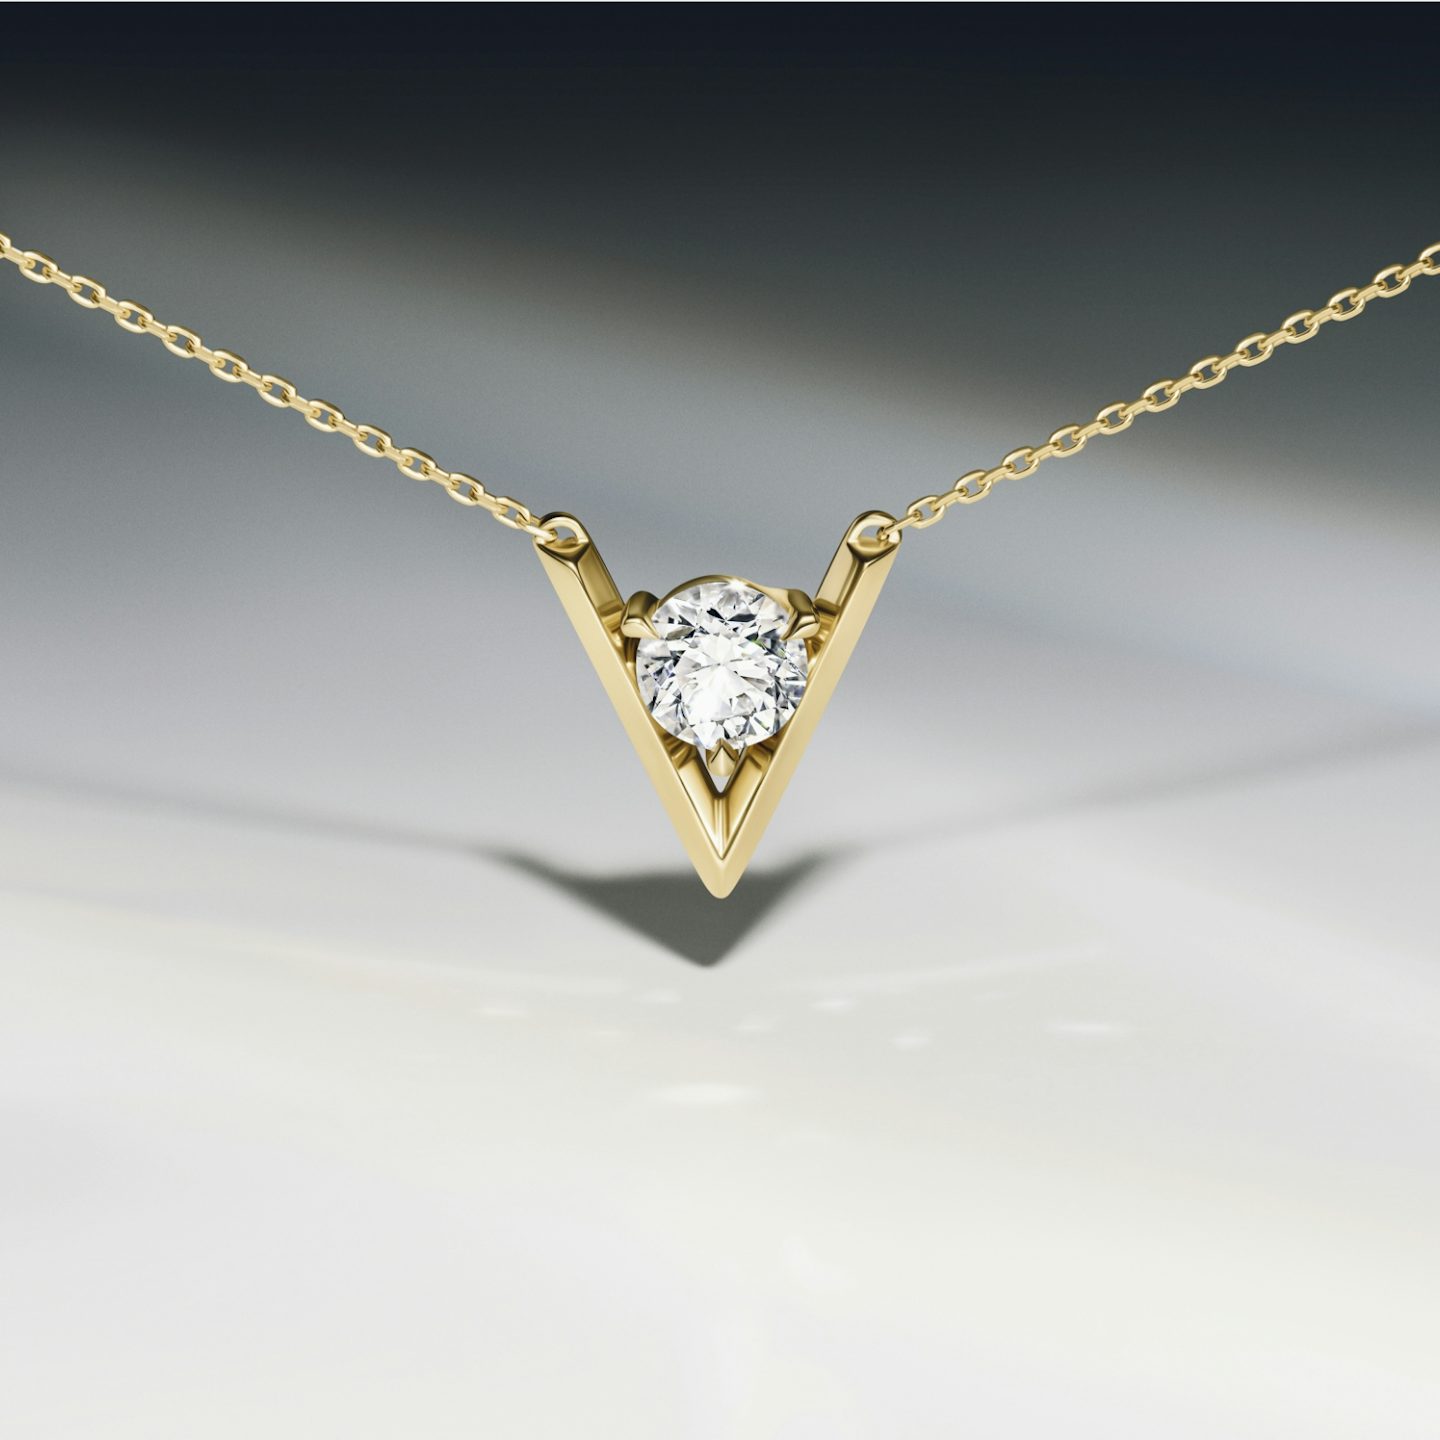 VRAI V Solitaire Necklace | Round Brilliant | Sterling Silver | Carat weight: 1/4